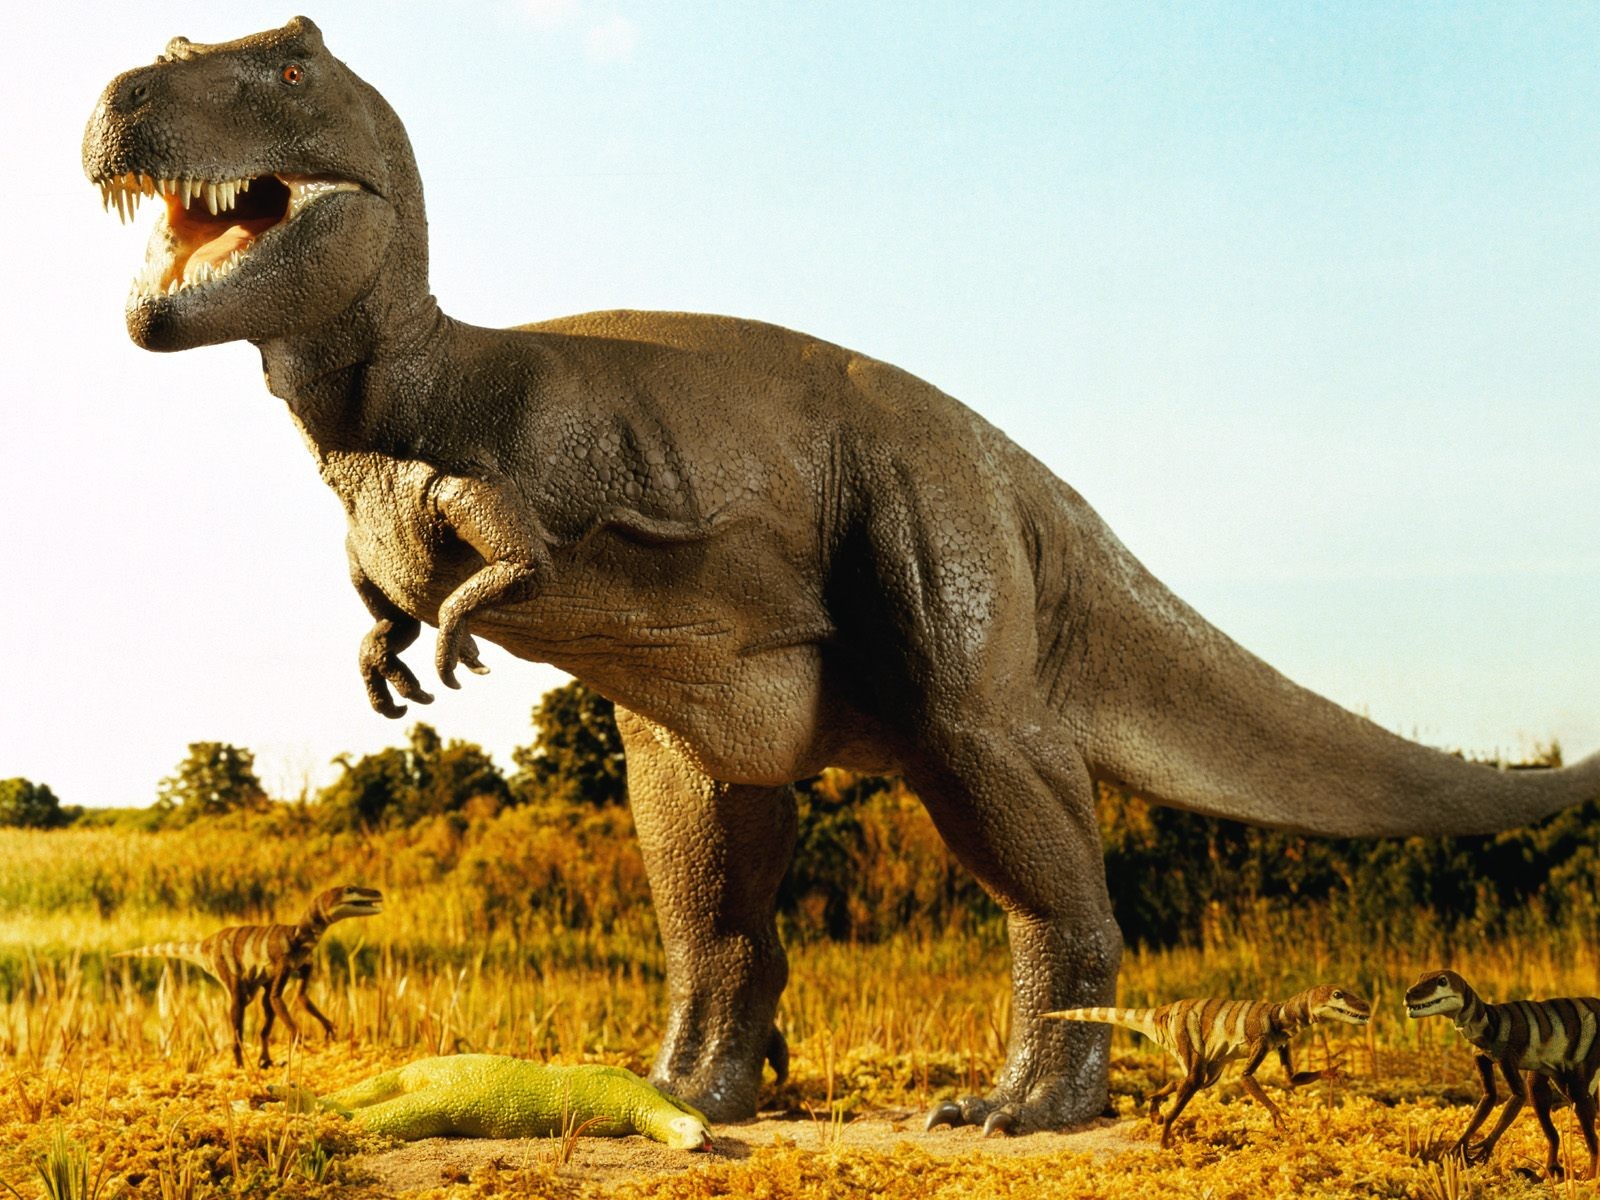 "If the asteroid hit five million years later or earlier, the dinosaurs might still be around," says paleontologist Stephen Brusatte of the United Kingdom's ...